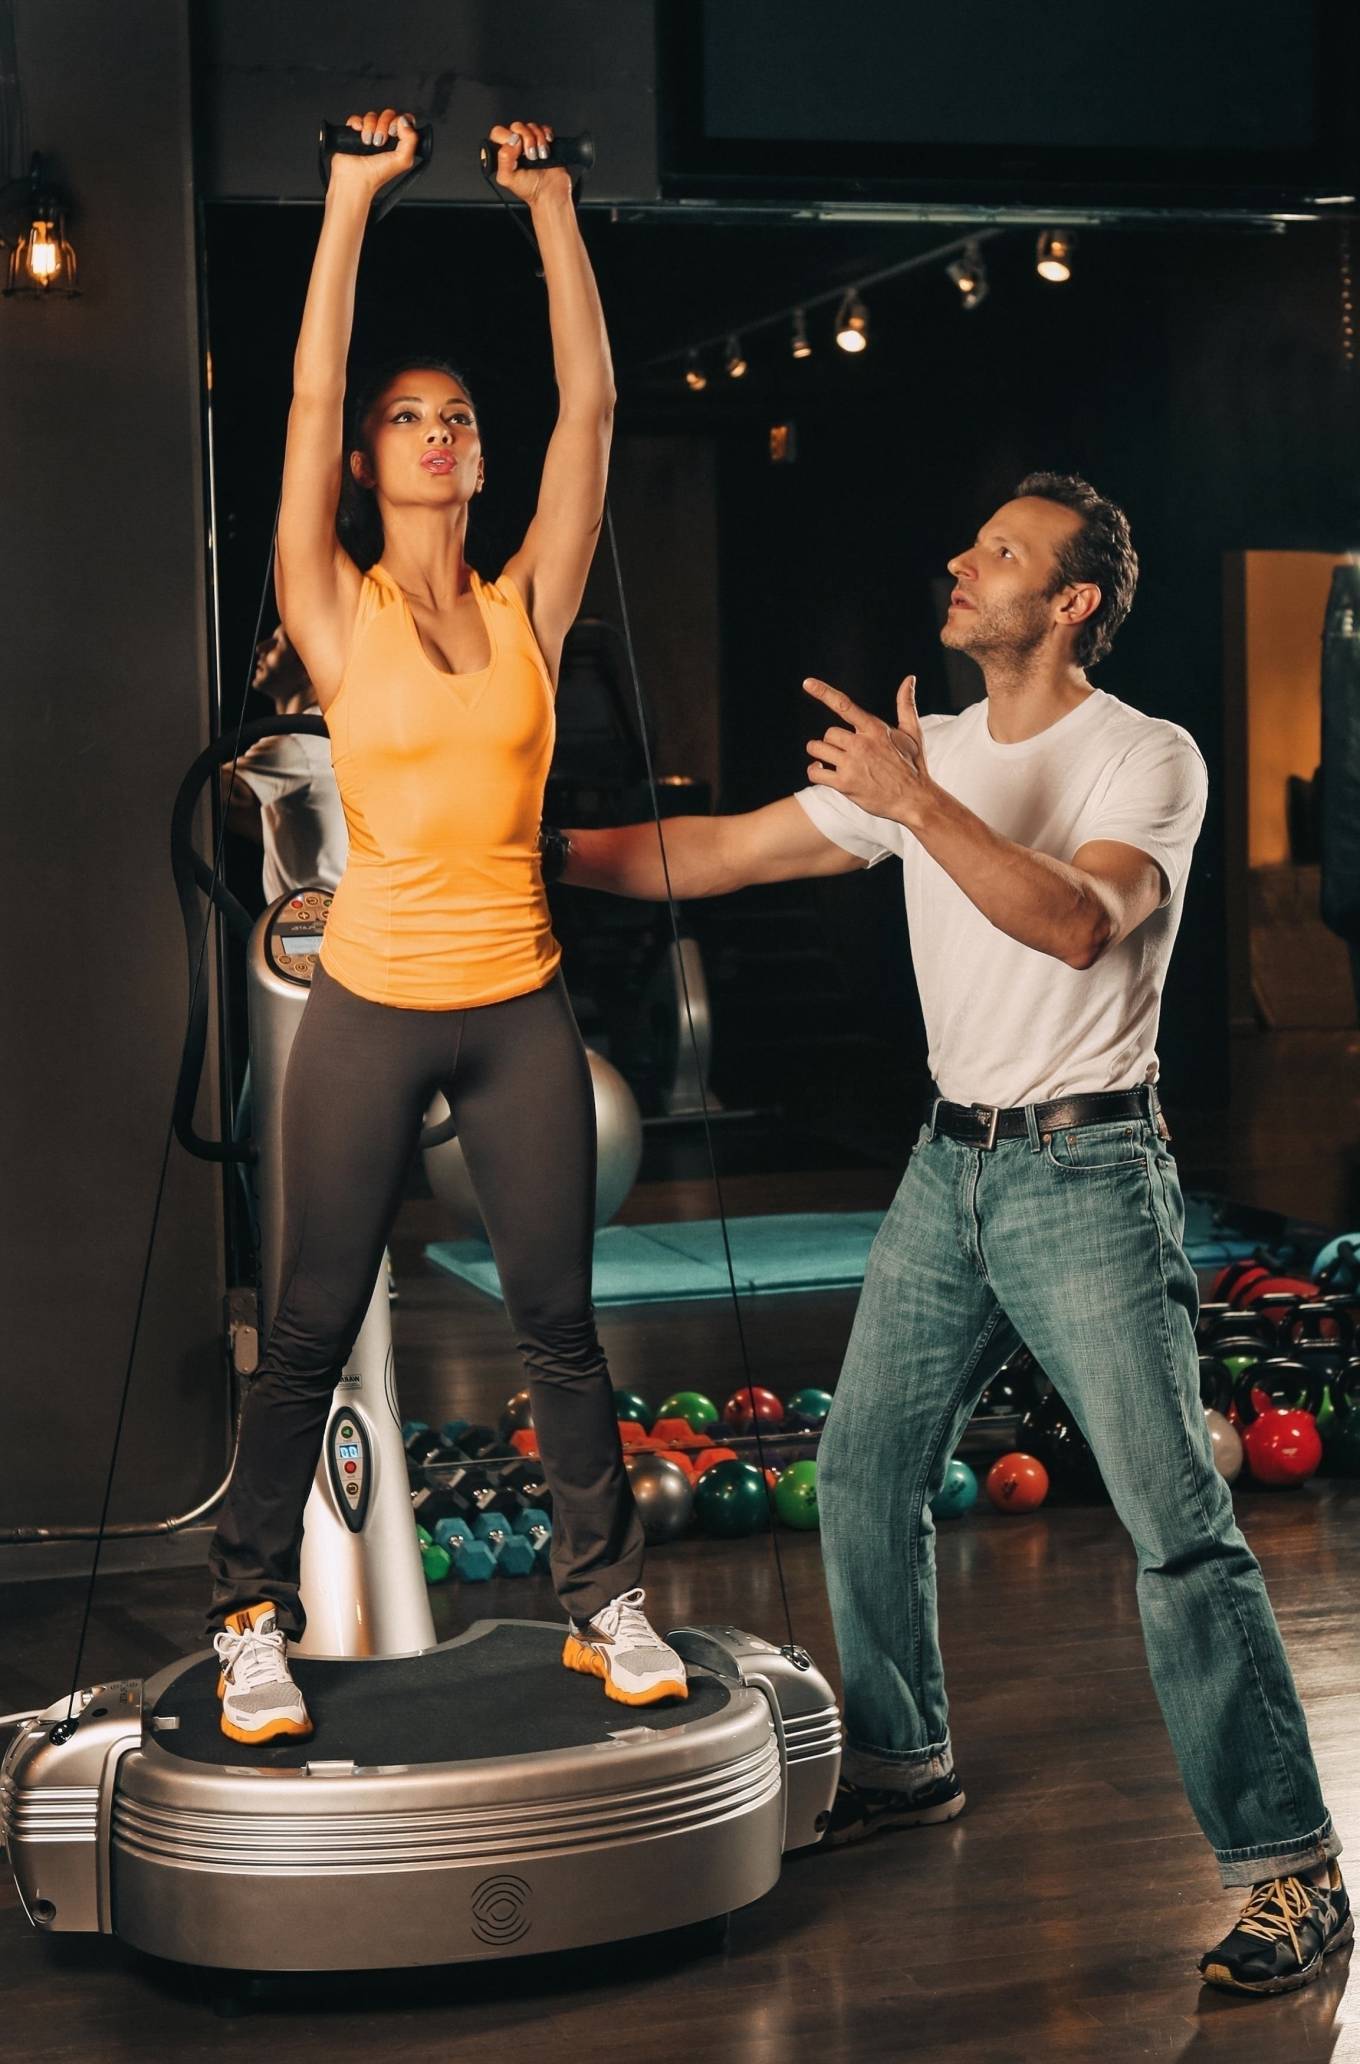 Nicole Scherzinger 2021 : Nicole Scherzinger – Pictured during a How to build a bigger booty exercise session in Los Angeles-05